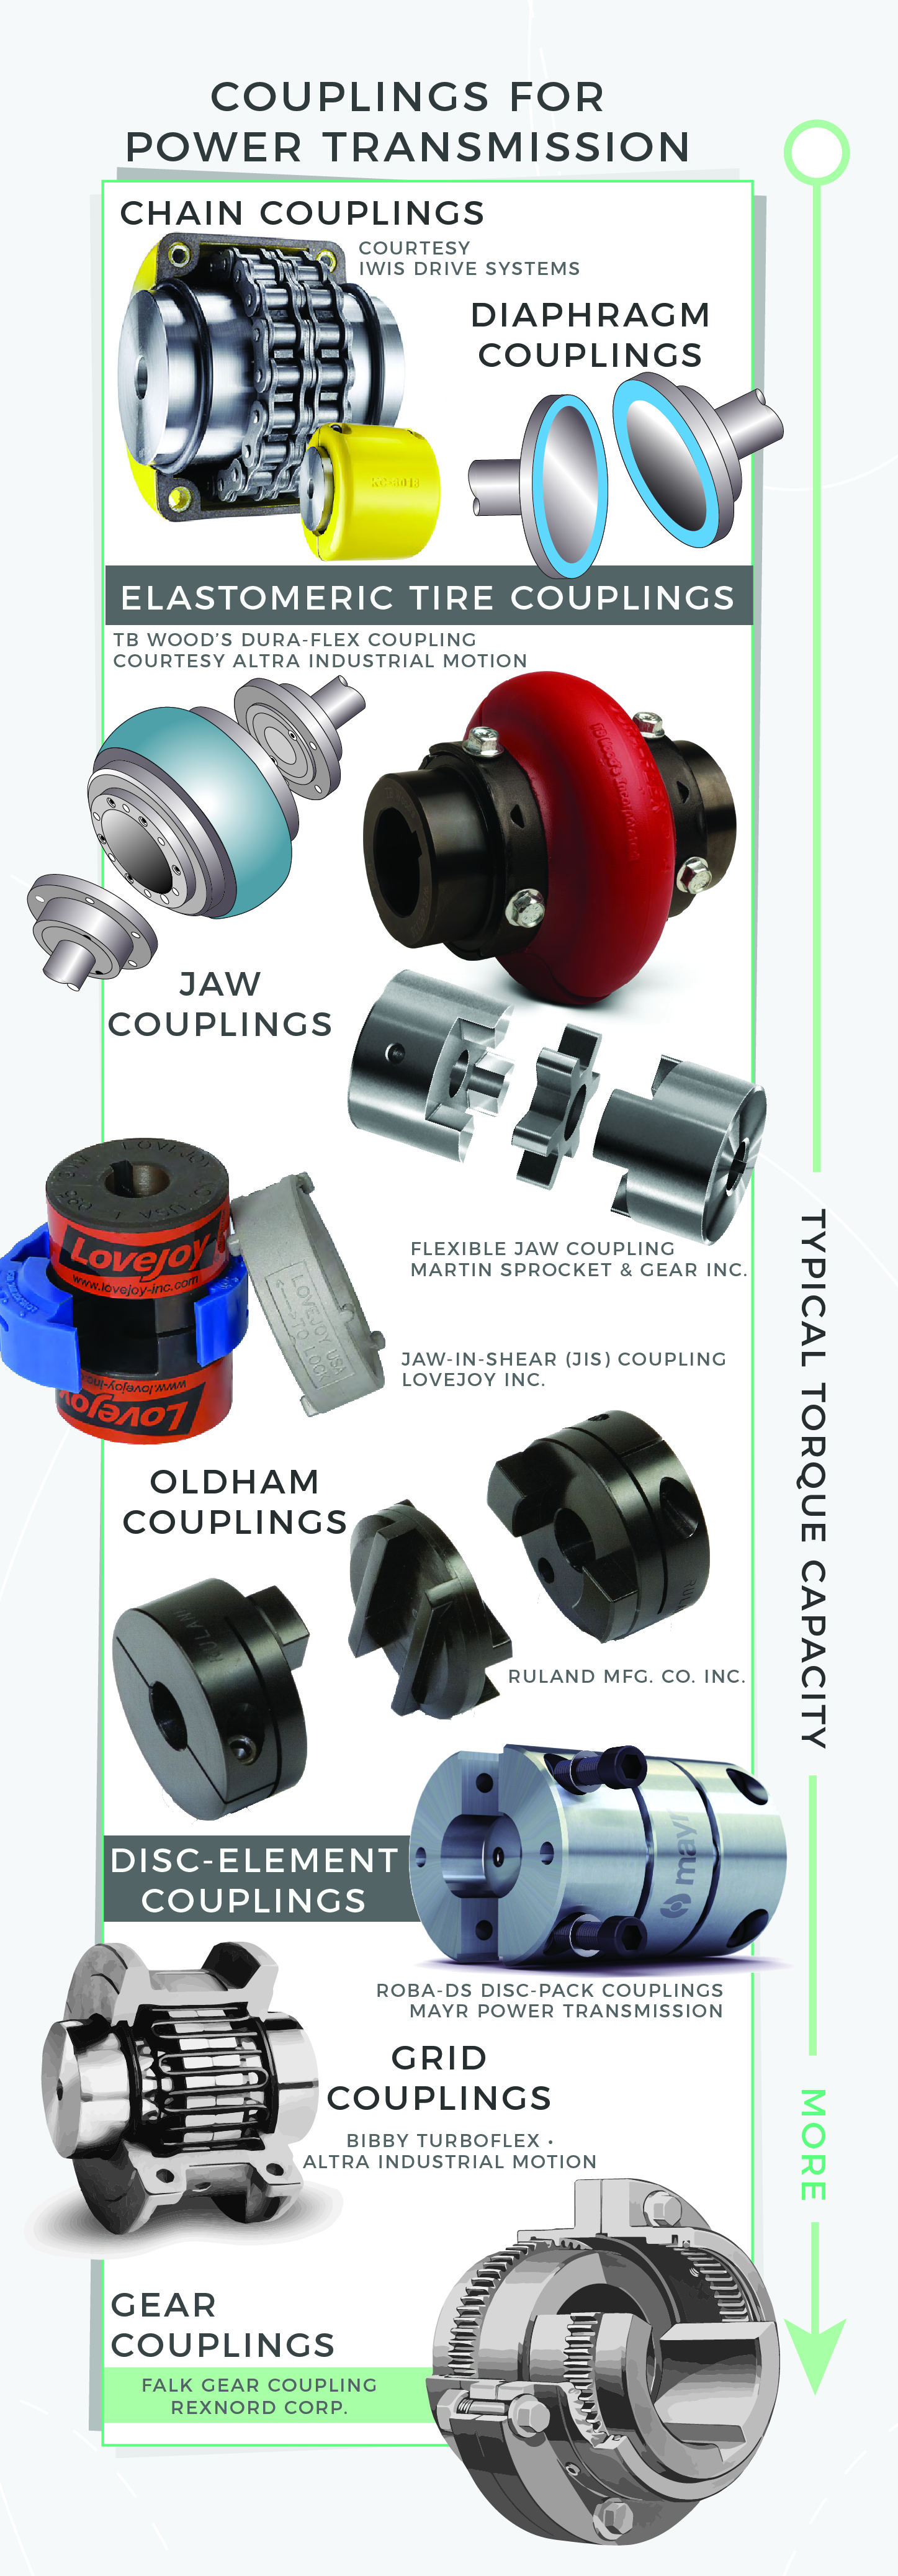 Shown here are chain couplings, elastomeric tire couplings, jaw couplings, Oldham couplings, disc couplings, grid couplings, and gear couplings.